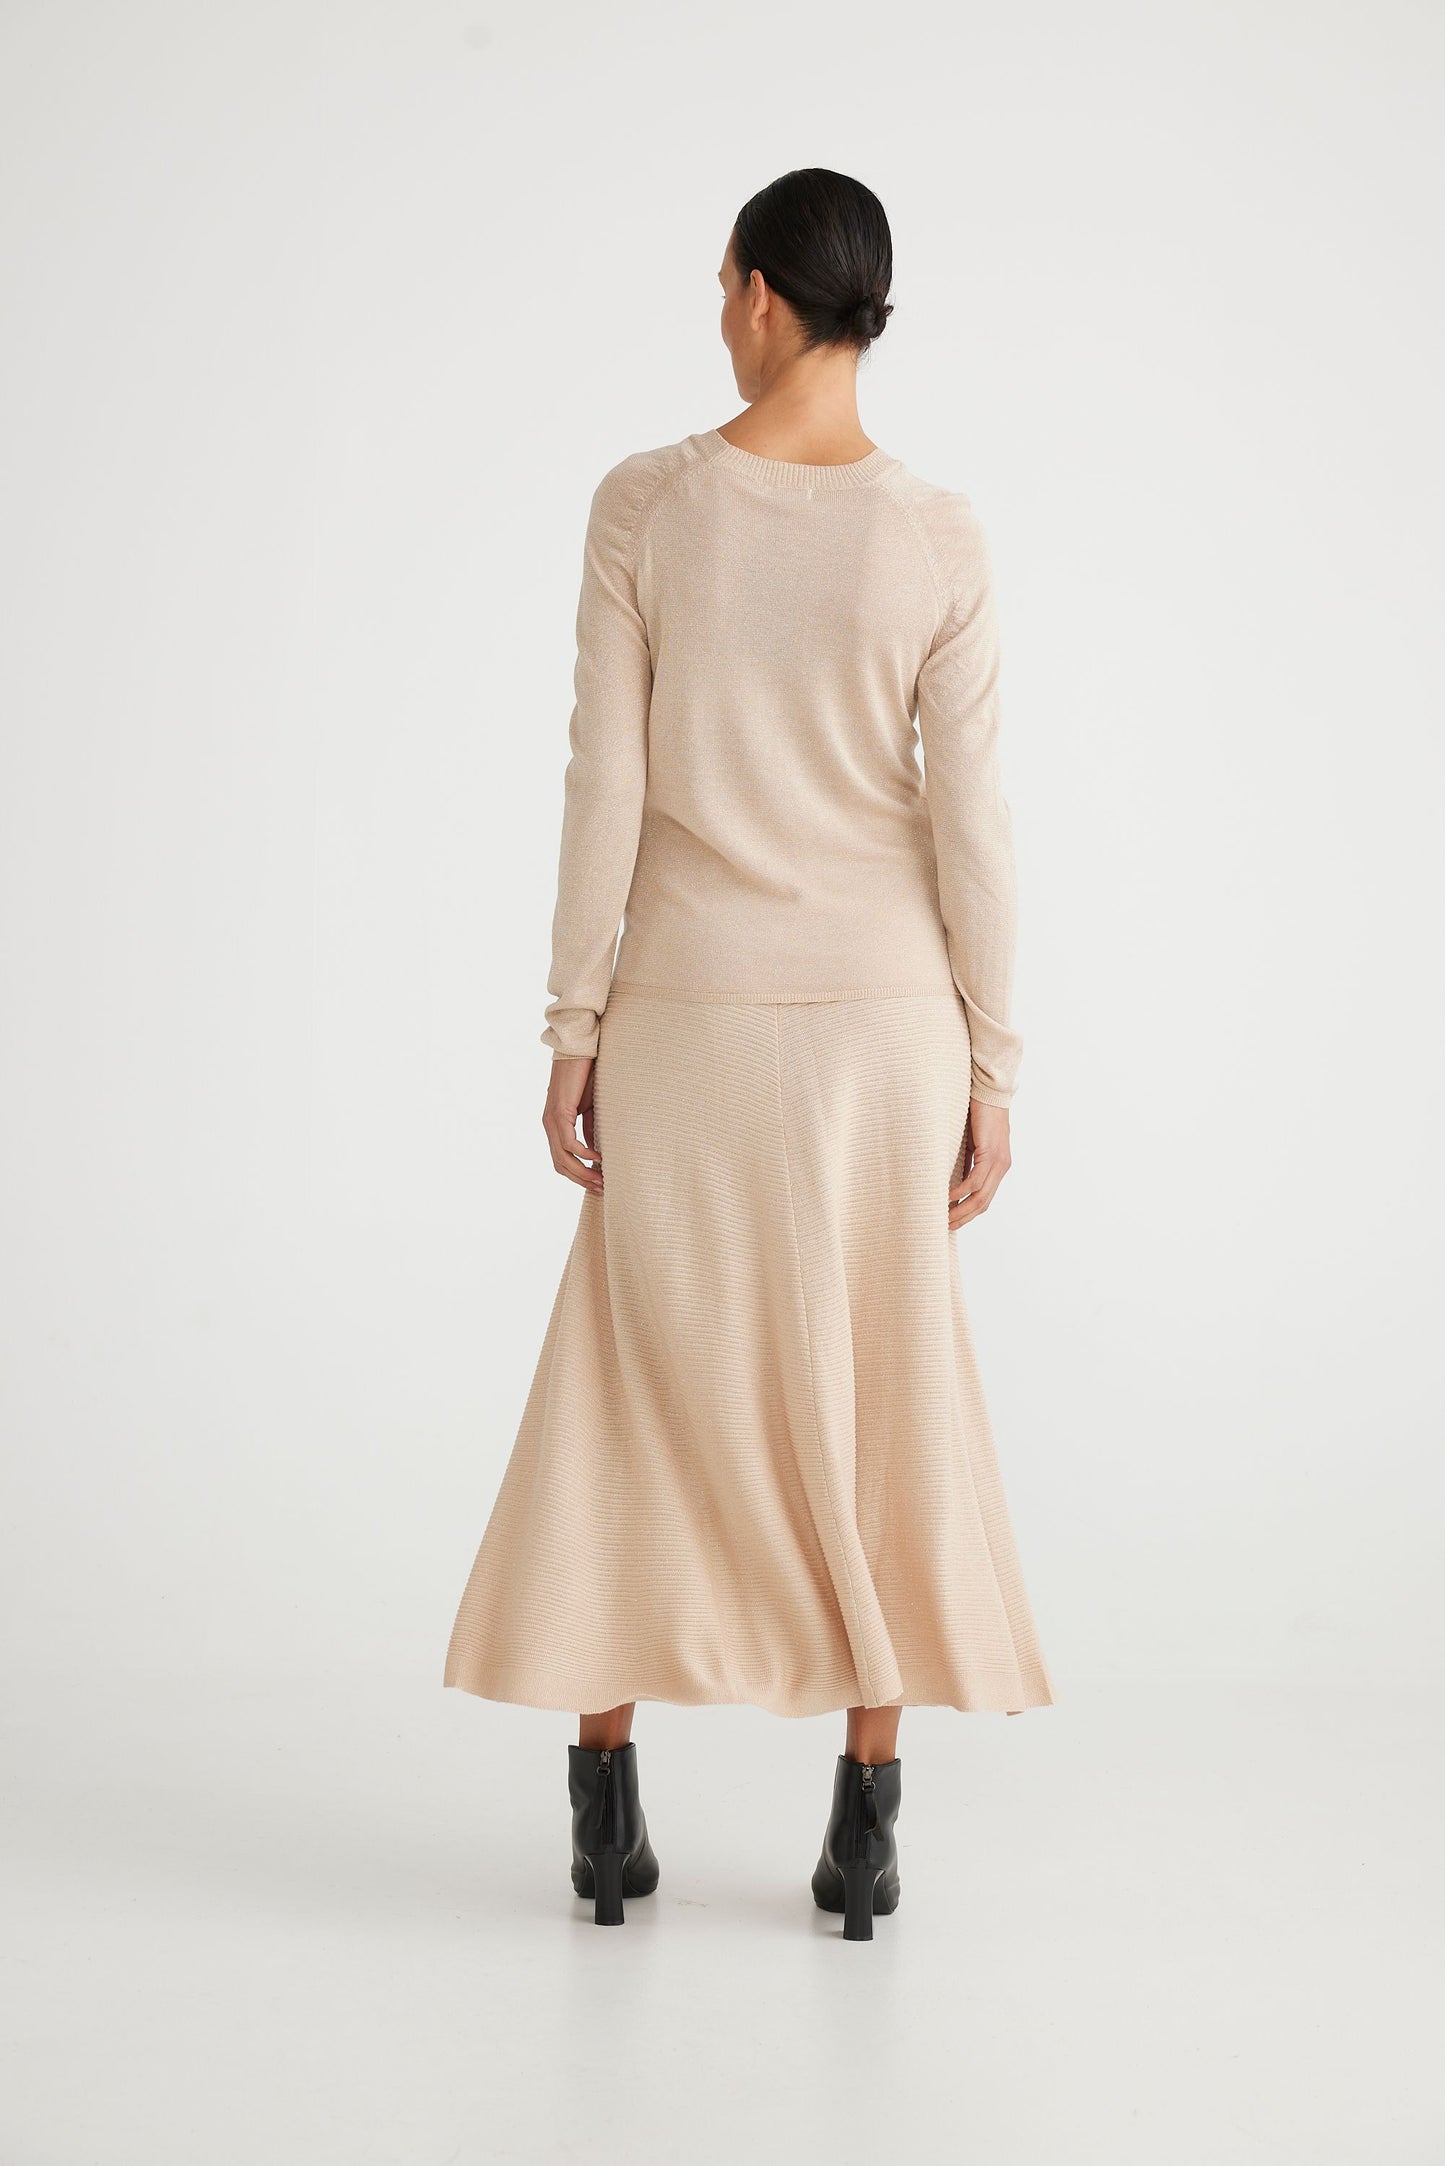 Brave and True Domenica Gathered Sleeve Knit - Champagne